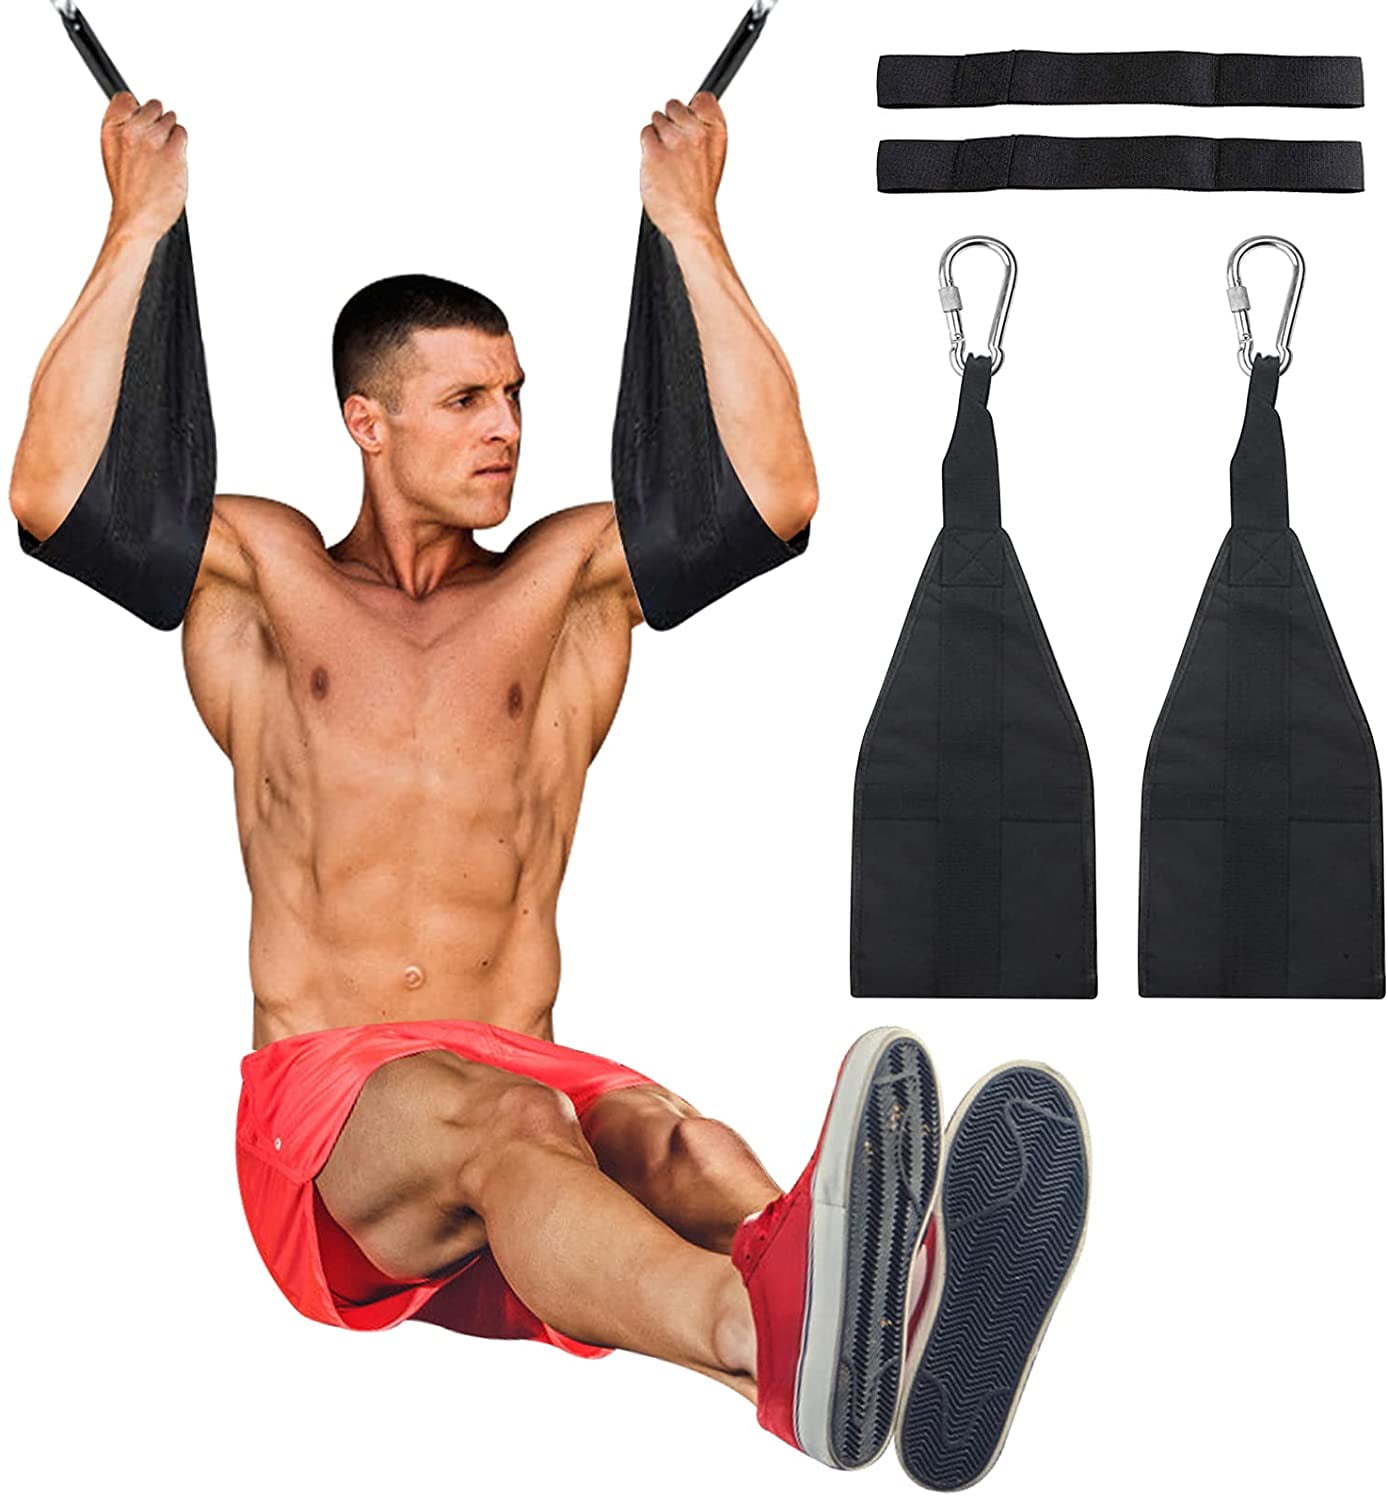 Resistance Band Pull-Up Bar Slings Straps Strength Training Home Gym Fit FatLoss 